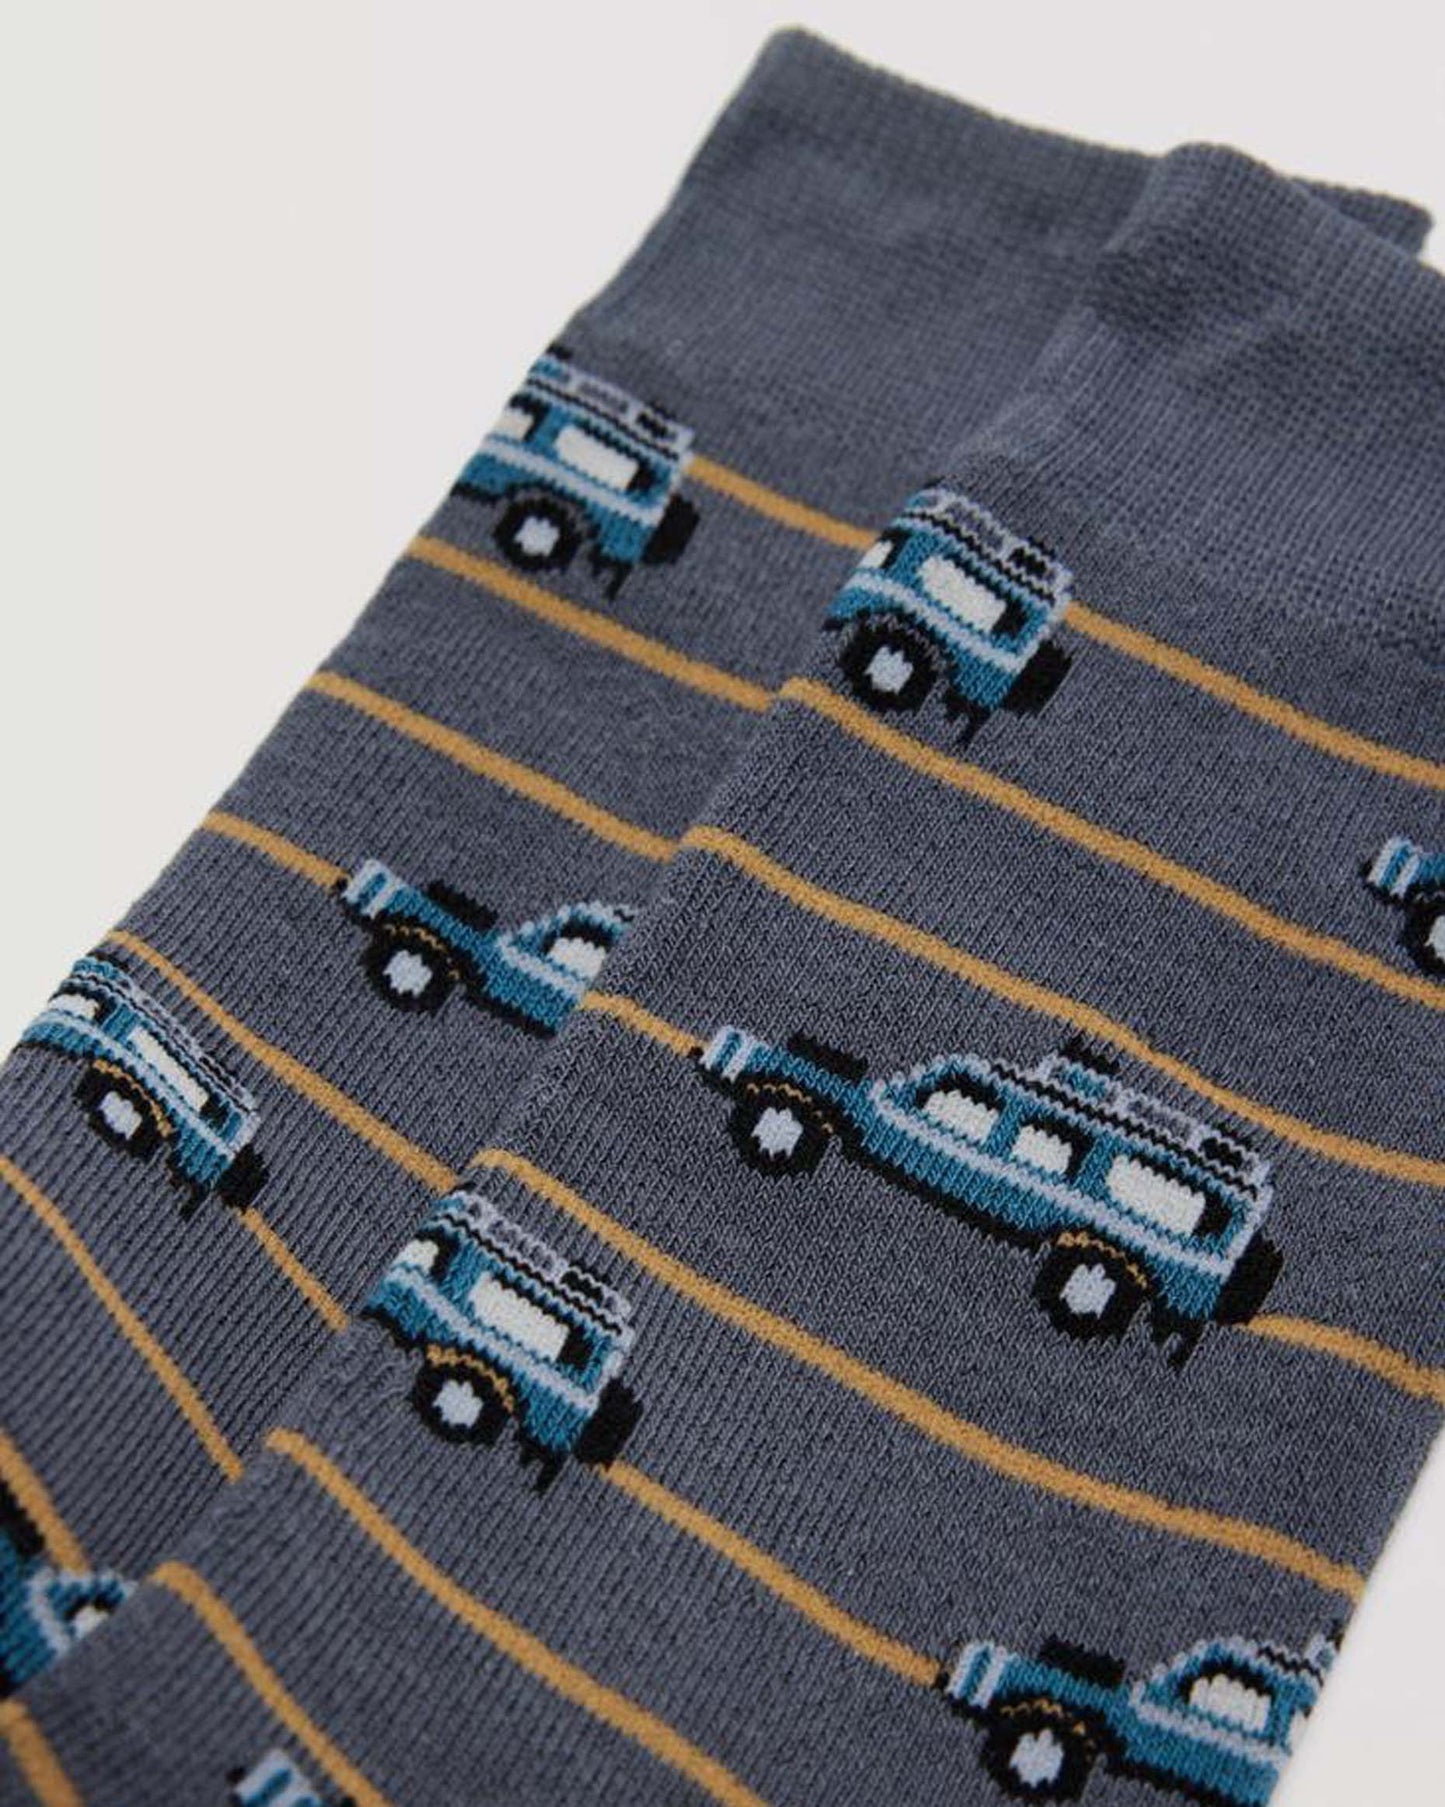 Ysabel Mora 22884 4x4 Sock - Grey thermal cotton crew length ankle socks with a blue 4x4 (Landrover Defender) pattern and horizontal mustard stripe.